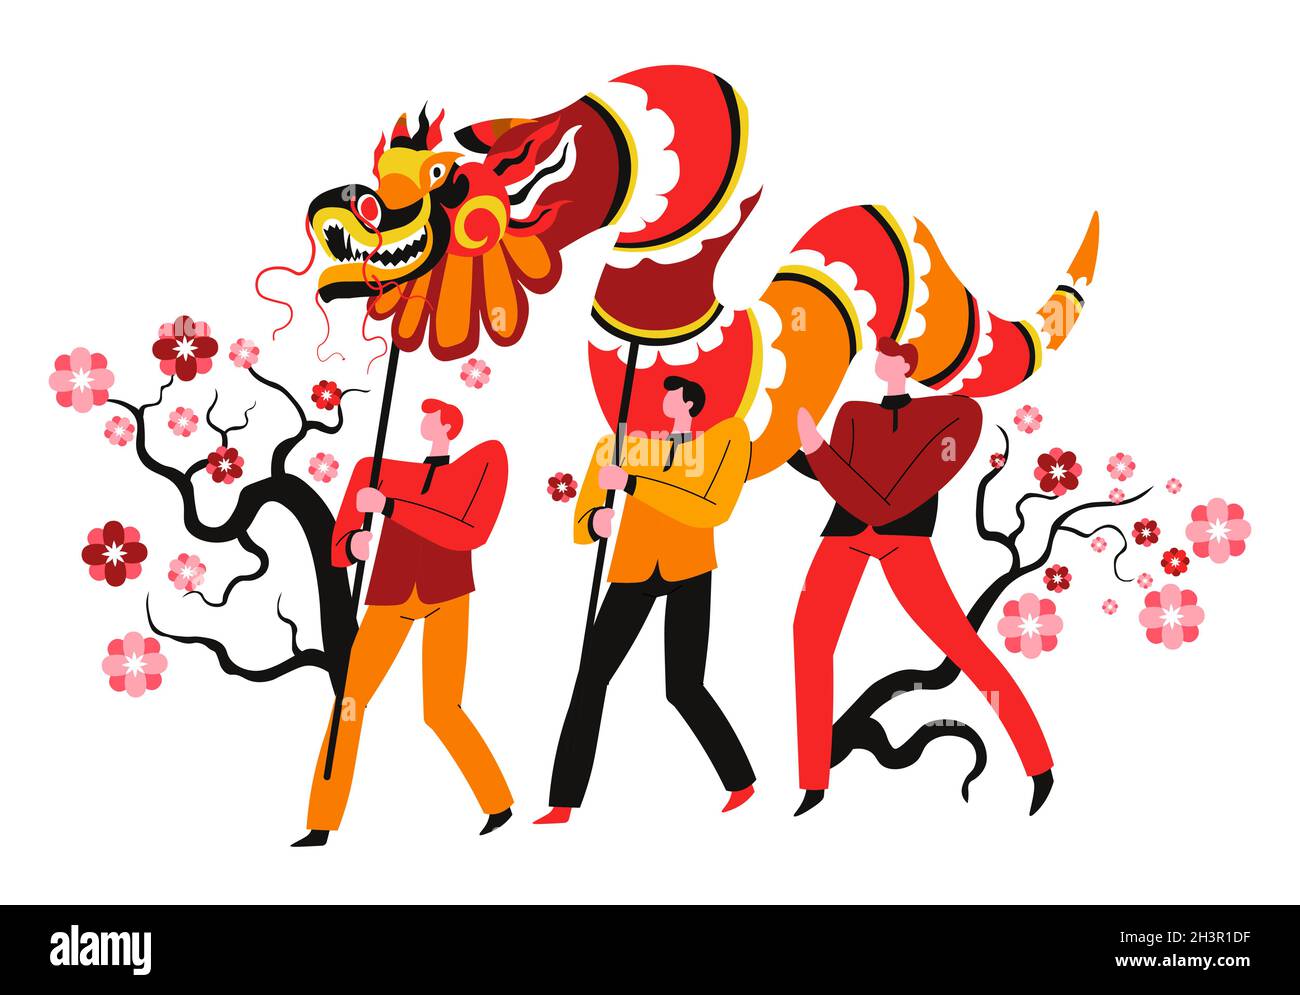 Fire dragon and male characters, Chinese festival and New Year Stock Vector